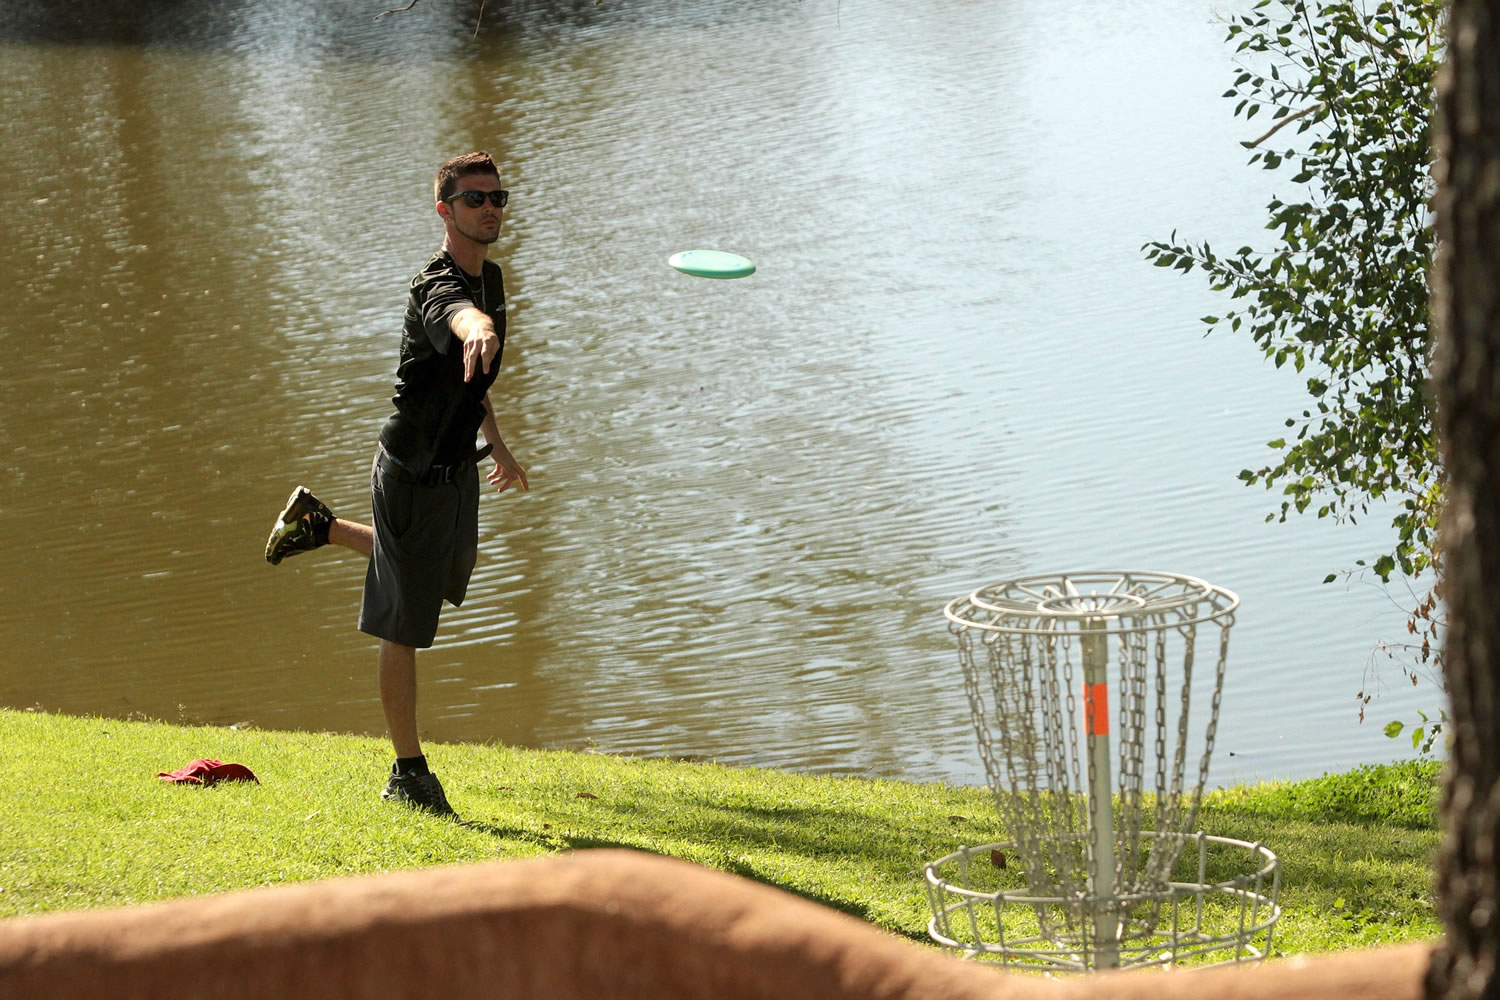 Disc golfer Cameron Lincoln lines up a putt in February during the final round of the 2015 Memorial tournament at Fiesta Lakes disc-golf course in Fountain Hills, Ariz.